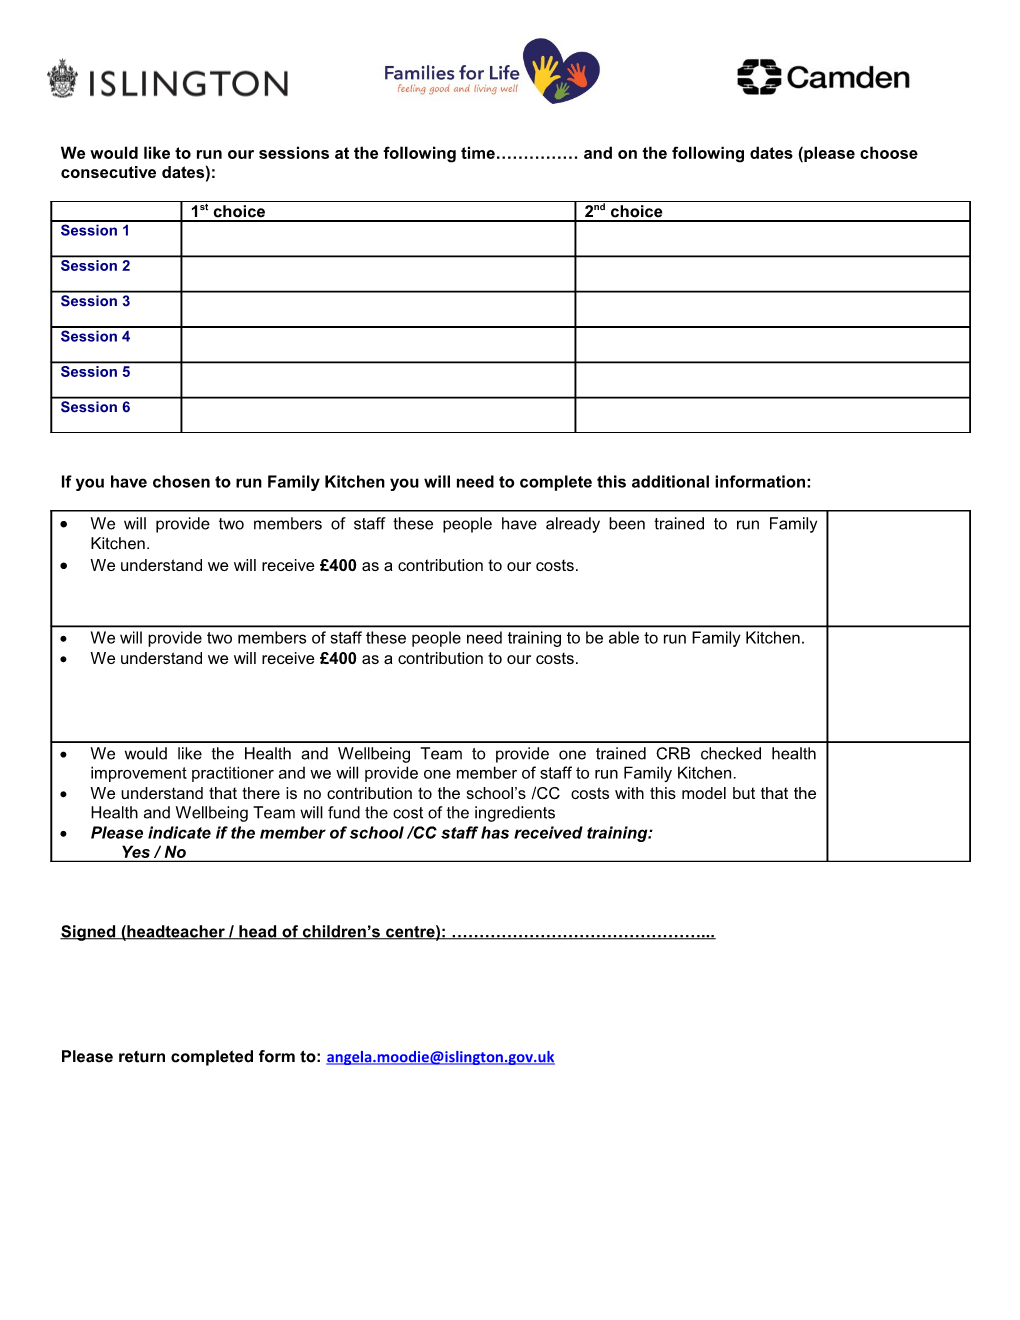 Family Kitchen Project Application Form